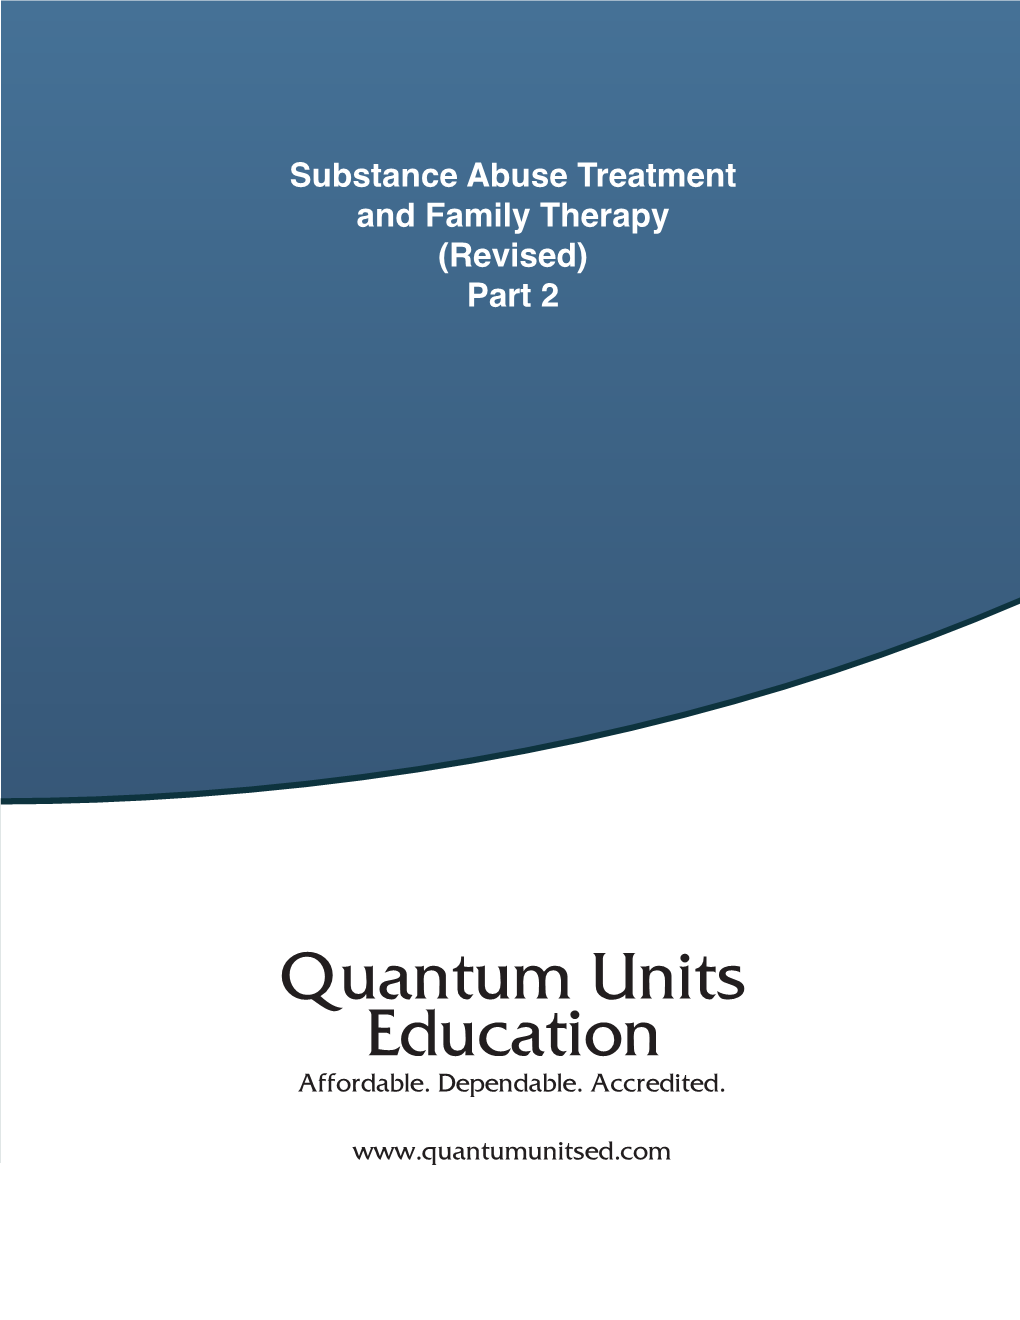 Substance Abuse Treatment and Family Therapy (Revised) Part 2 Contents